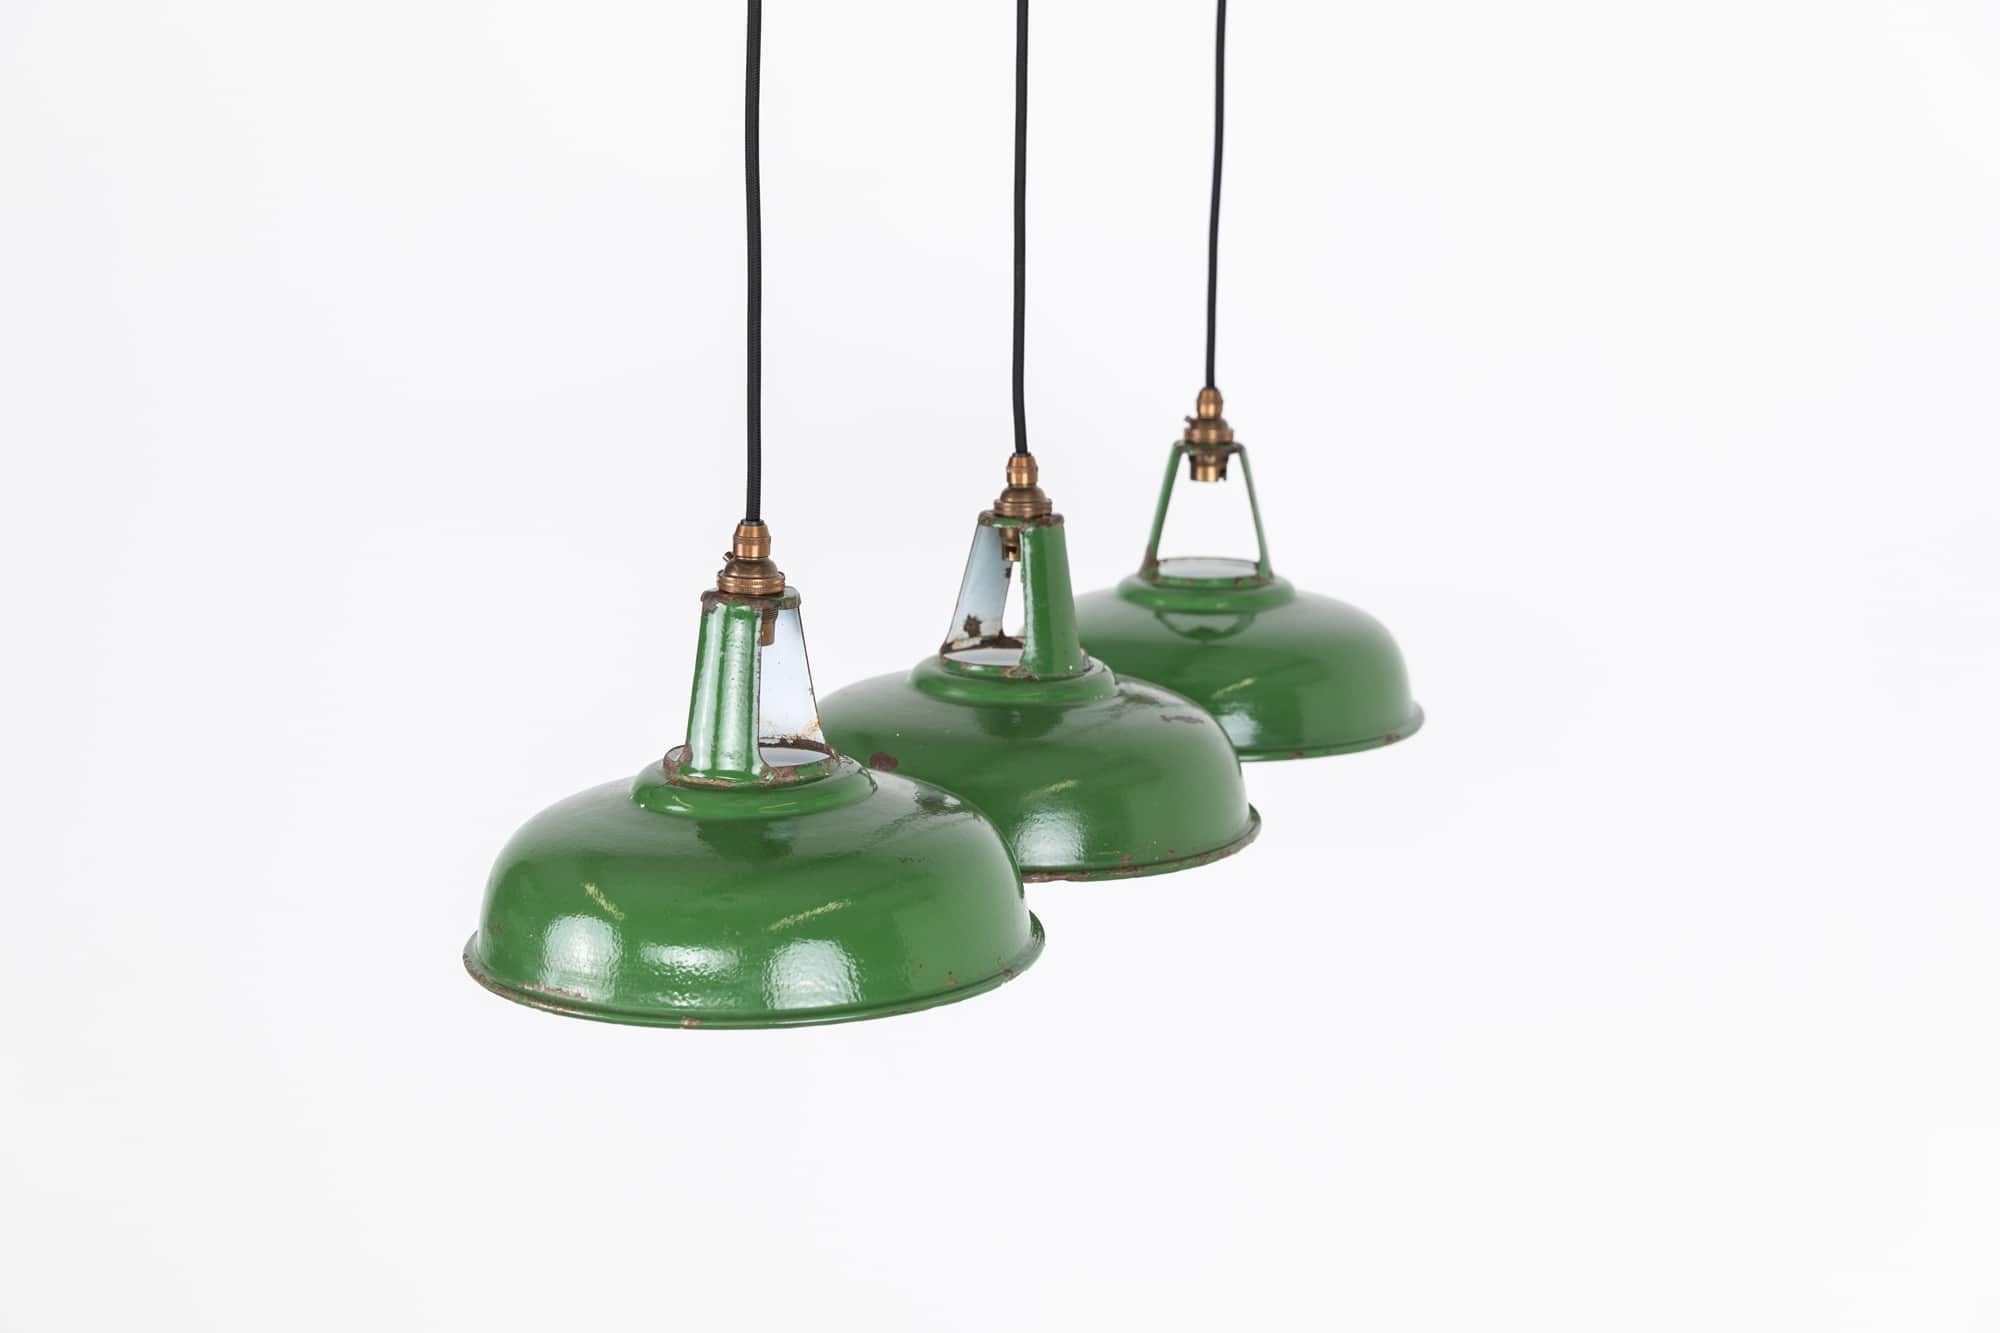 Pressed Vintage Industrial Coolicon Green Enamel Factory Pendant Light, C.1930 For Sale